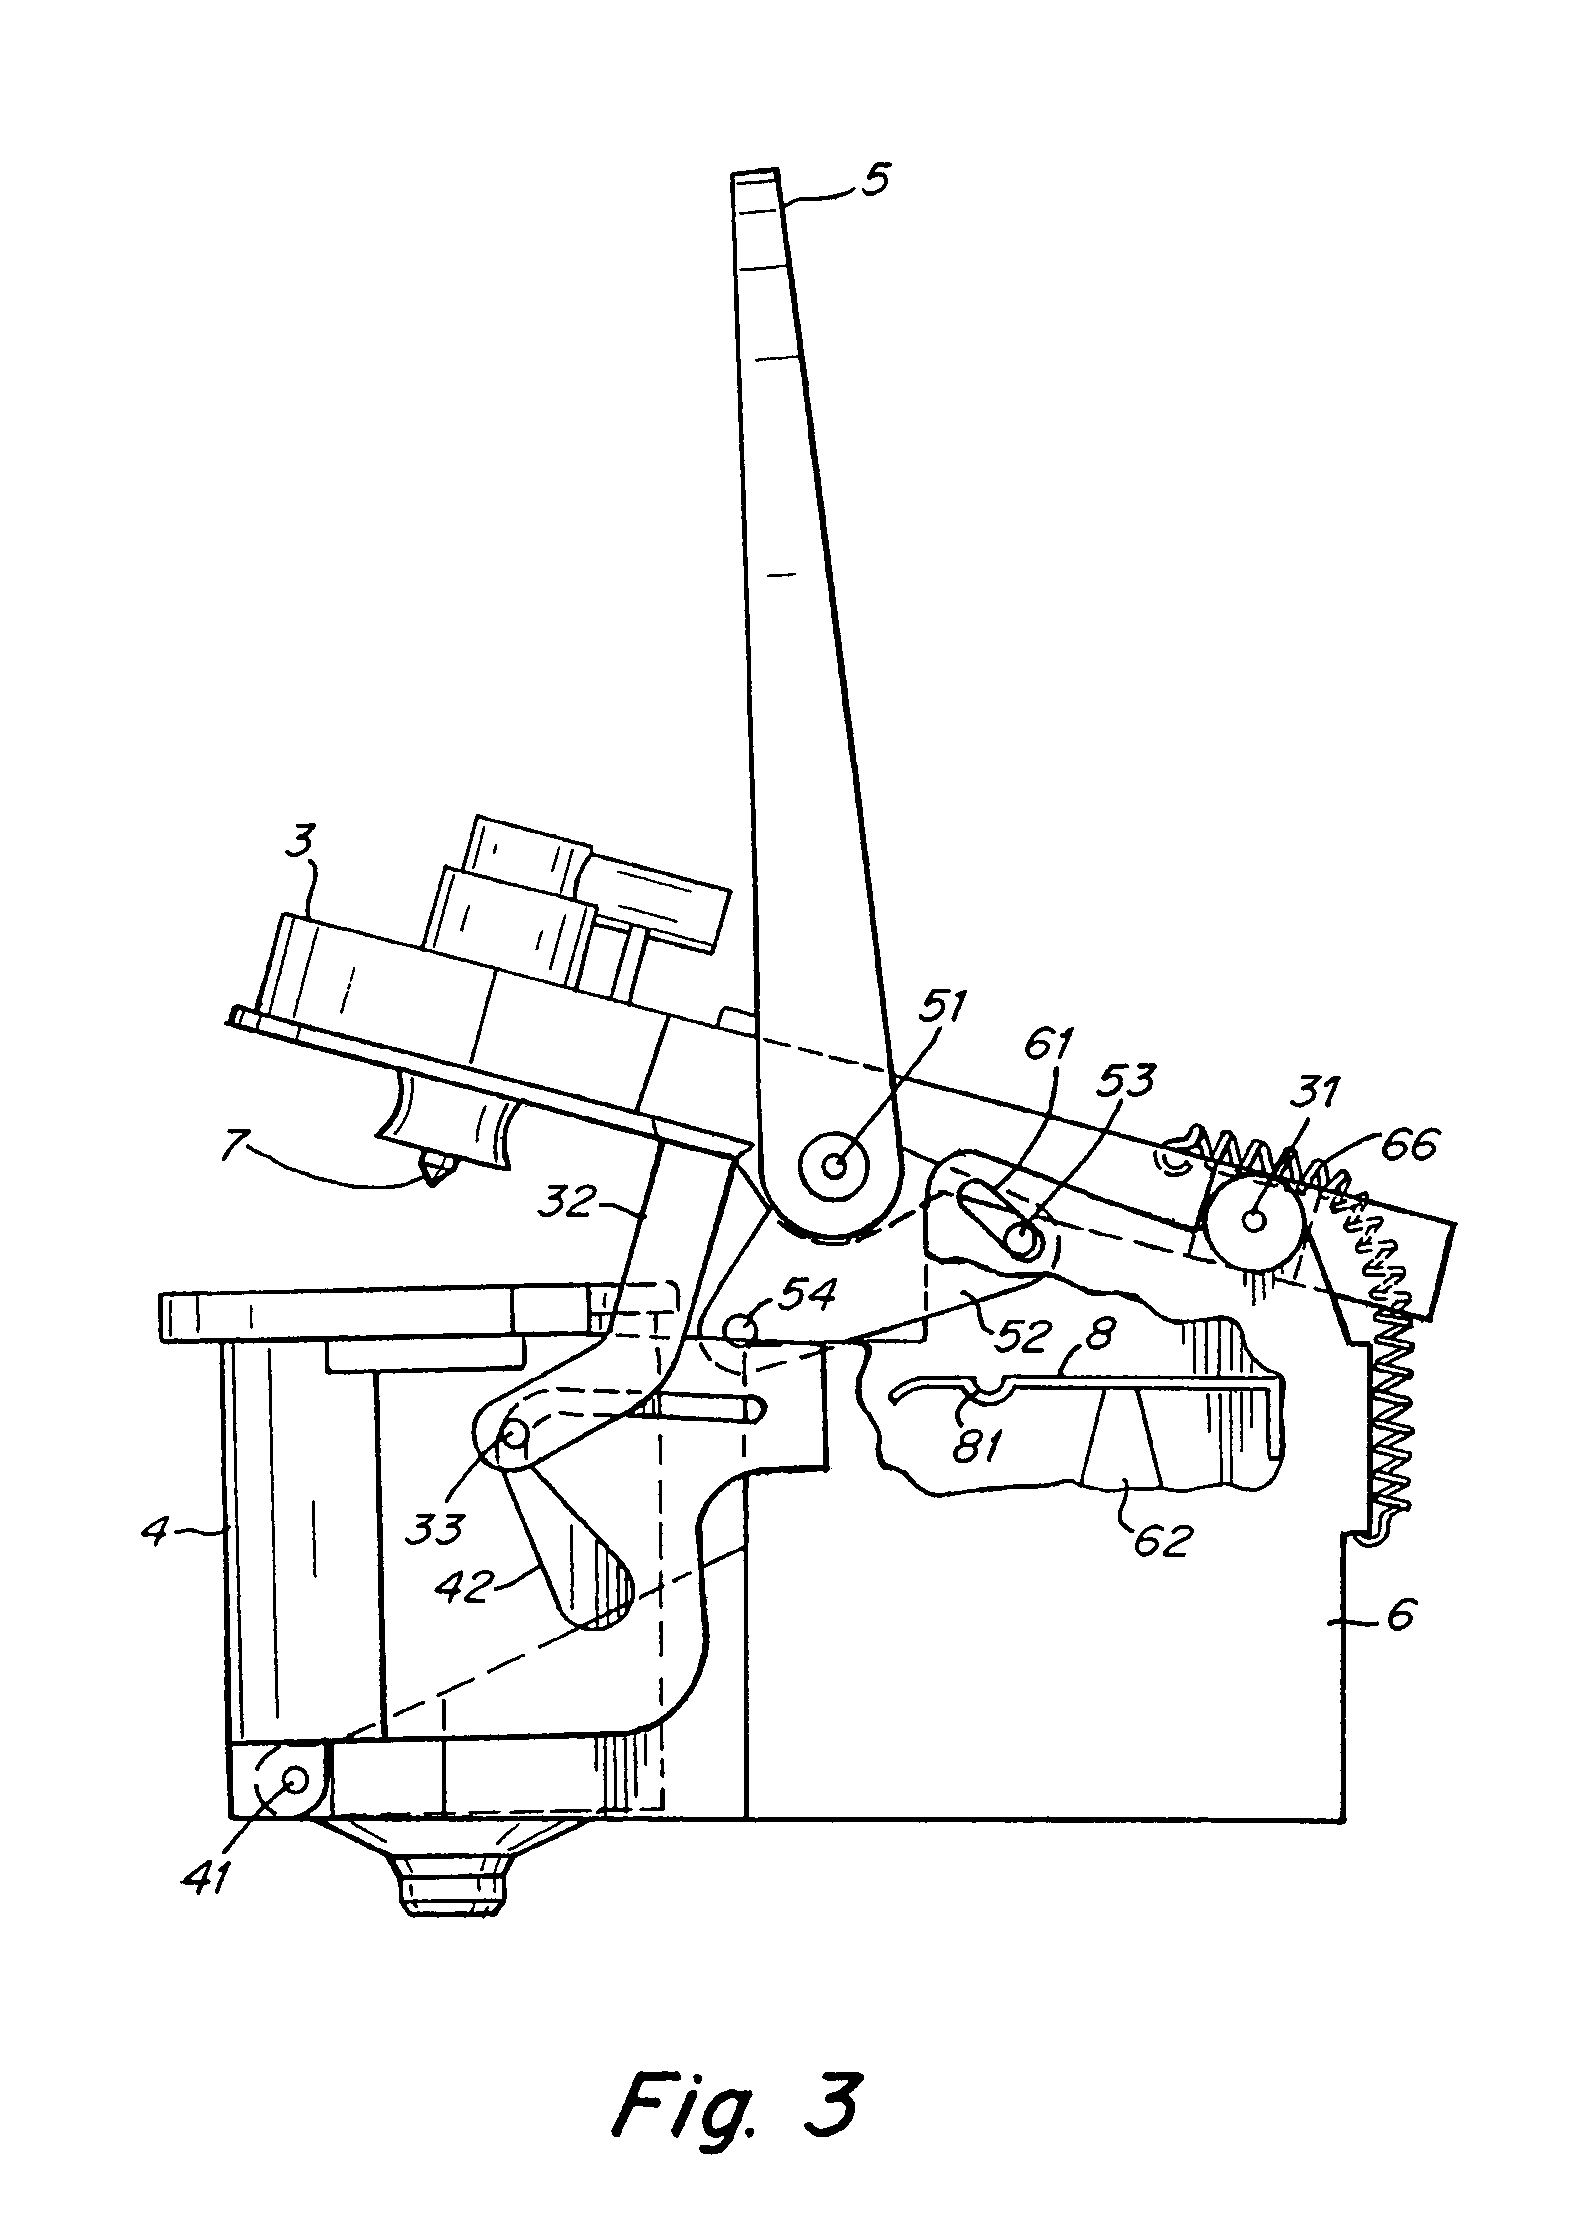 Beverage forming device with opening/closing mechanism for a beverage cartridge receiver